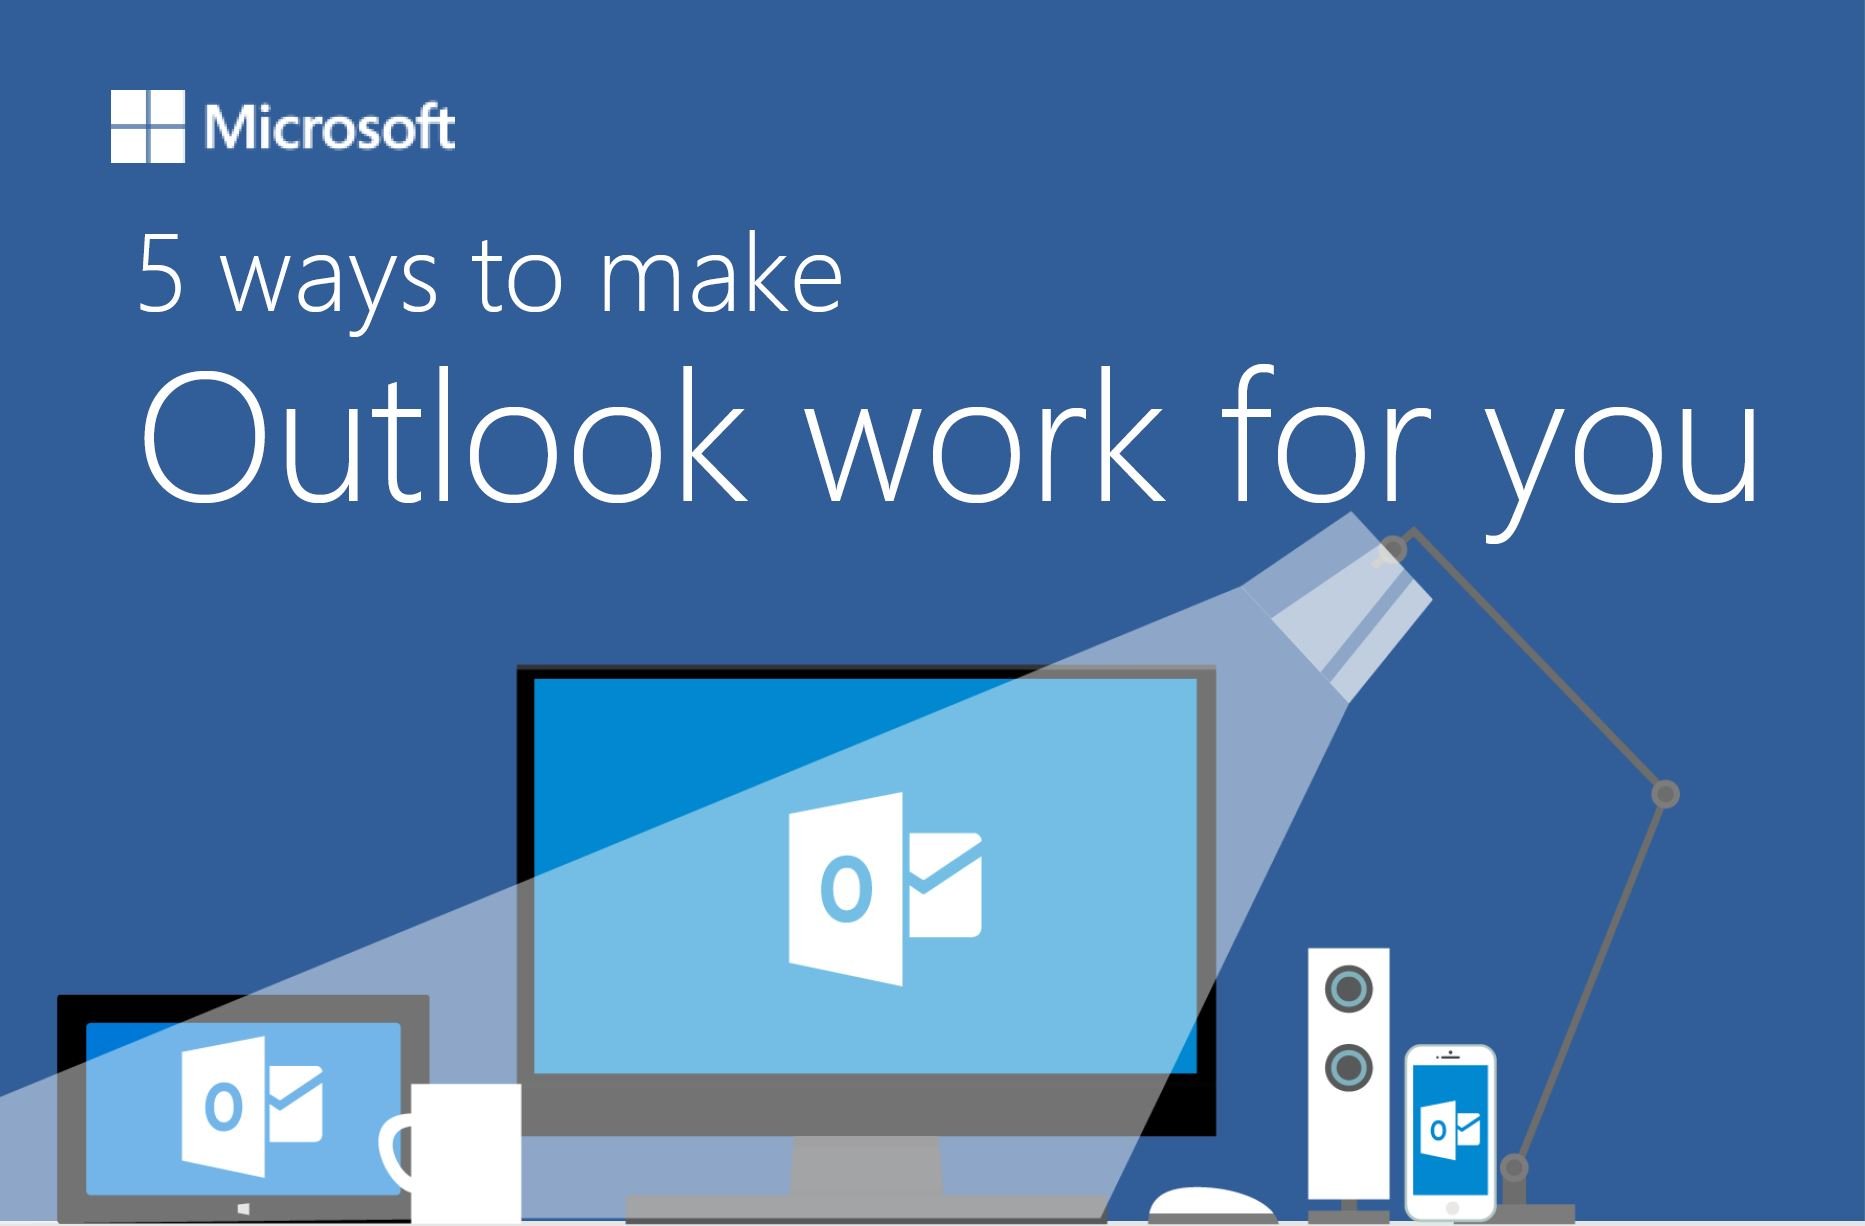 Microsoft-Outlook-Infographic